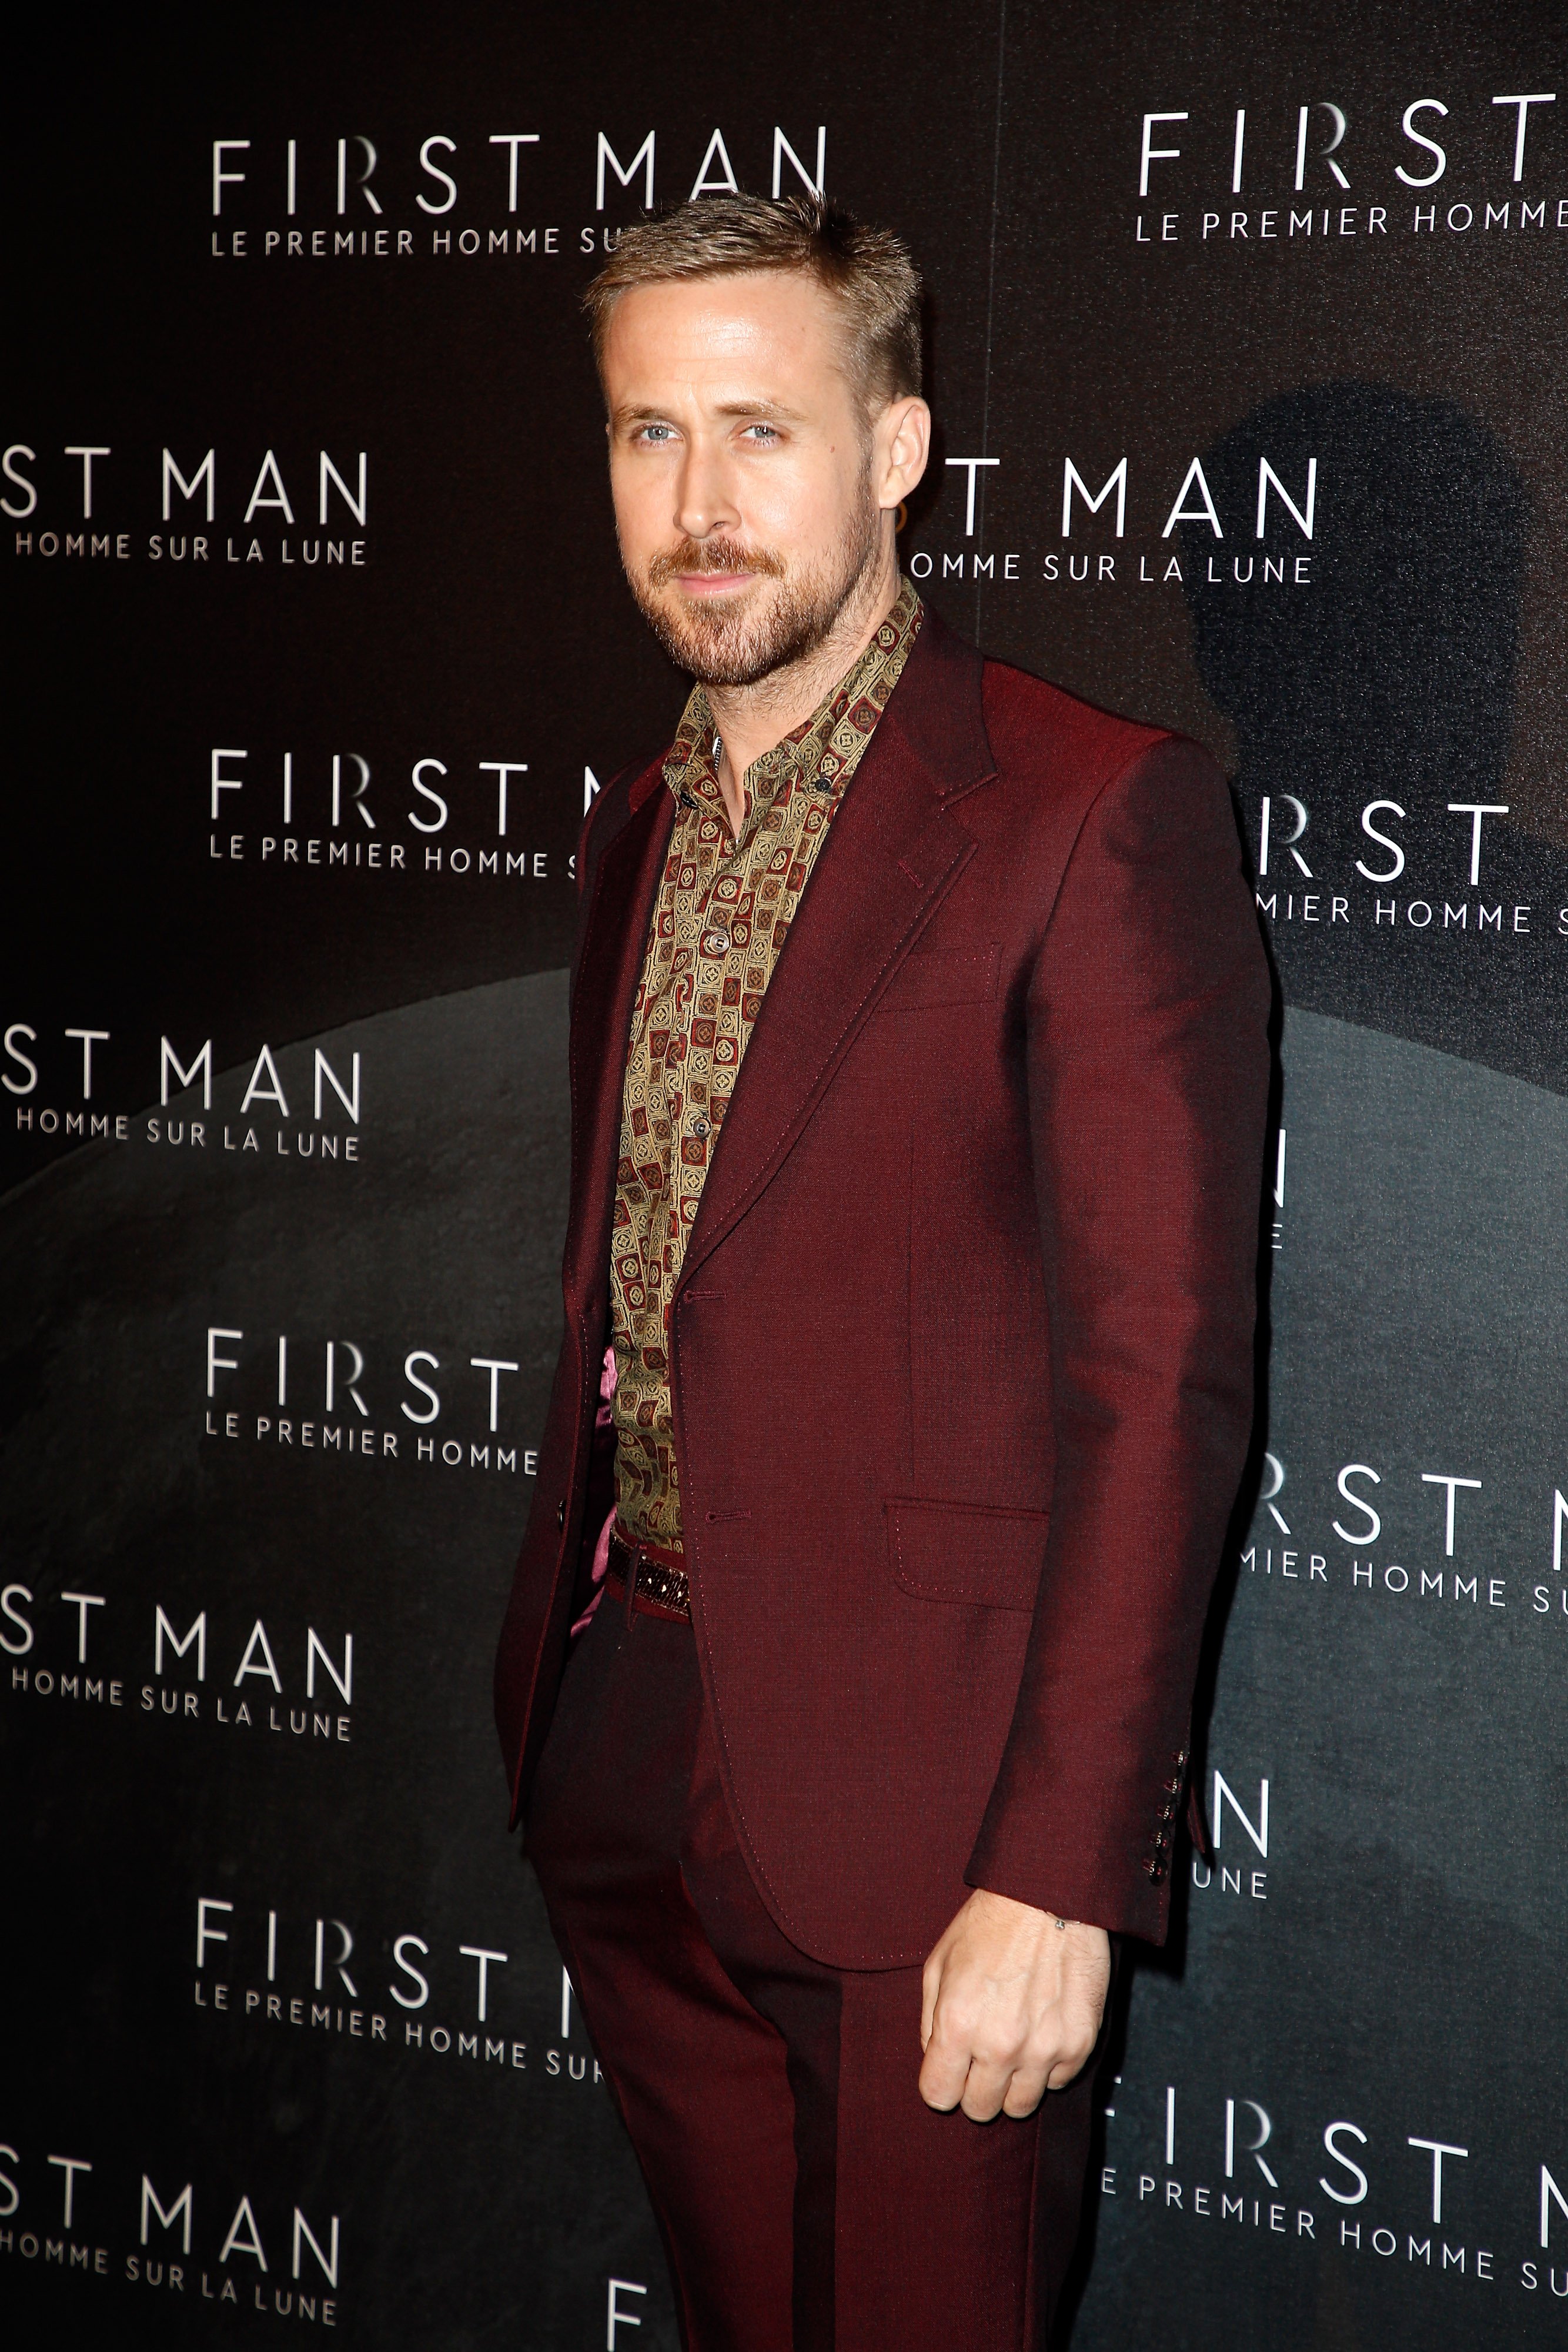 Actor Ryan Gosling poses for photo in a maroon suit at at the 'First Man Paris' premiere